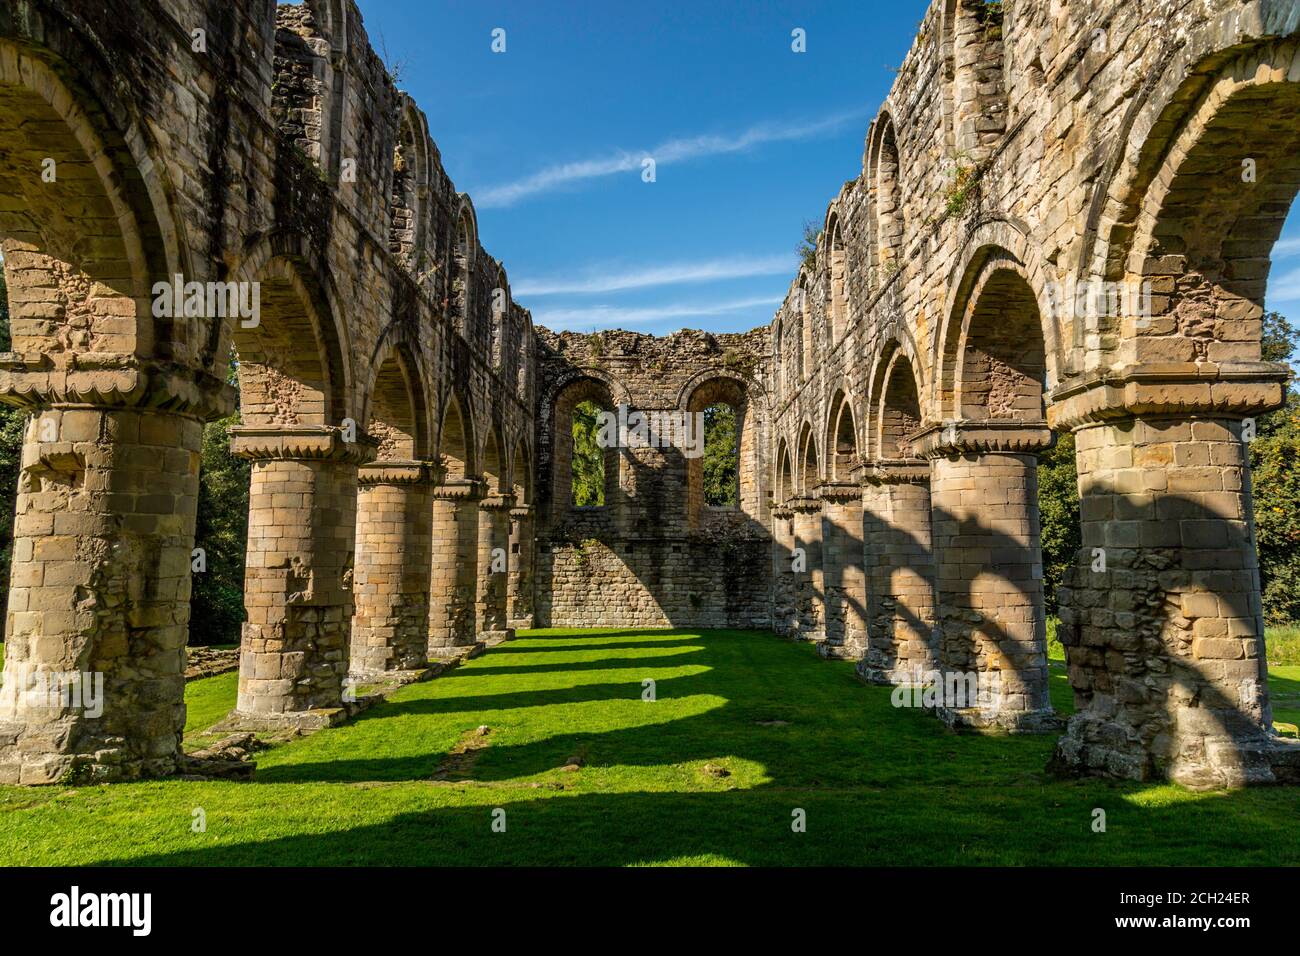 The ruins of Buildwas Abbey, a 12th Century Cistercian Monastery, located next to the River Severn in Buildwas, Shropshire, England. Stock Photo